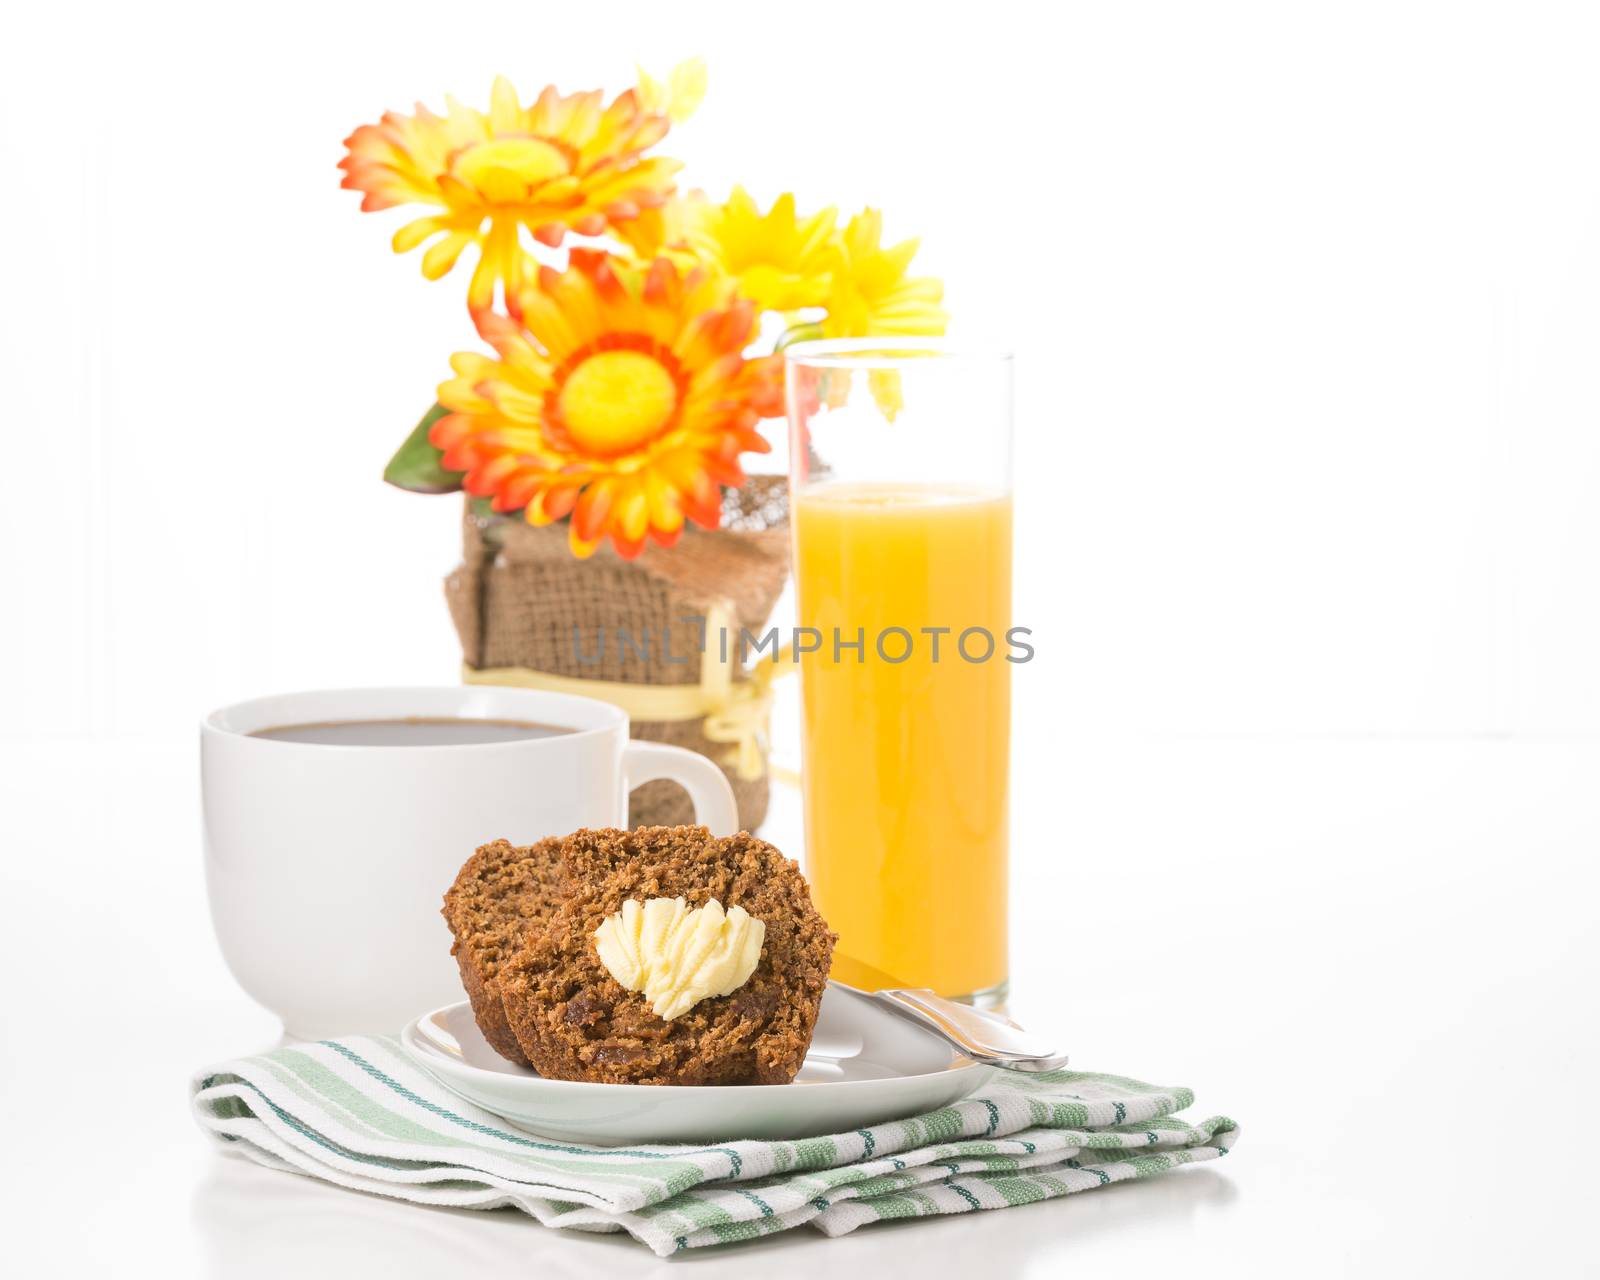 Muffin Coffee and Orange Juice by billberryphotography